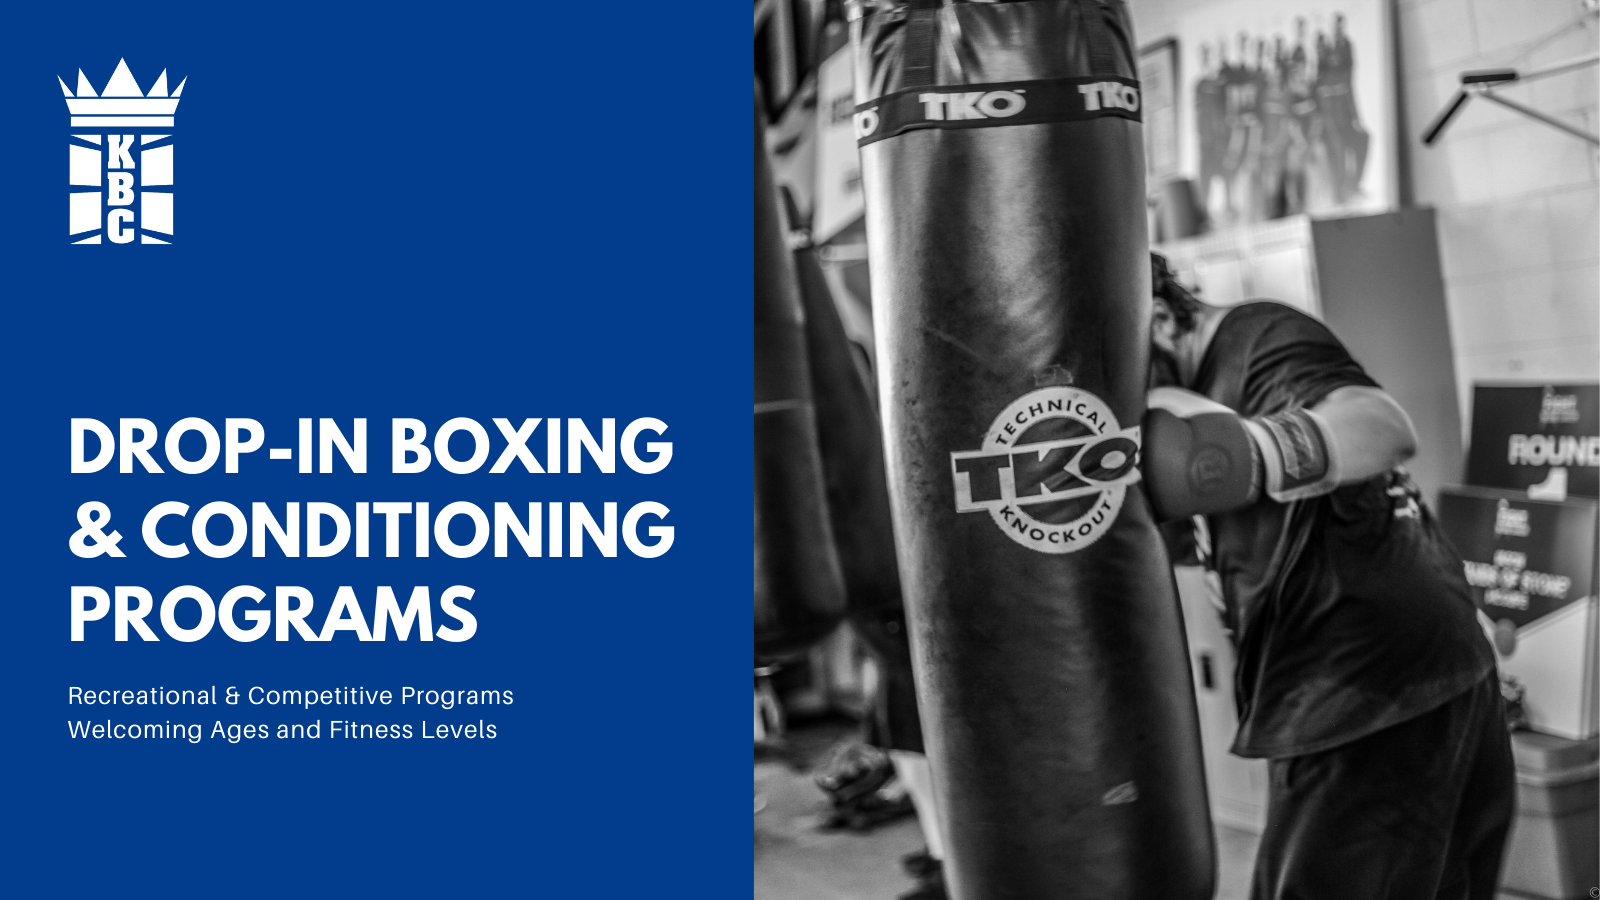 Small Group Adult Boxing Classes are HERE!